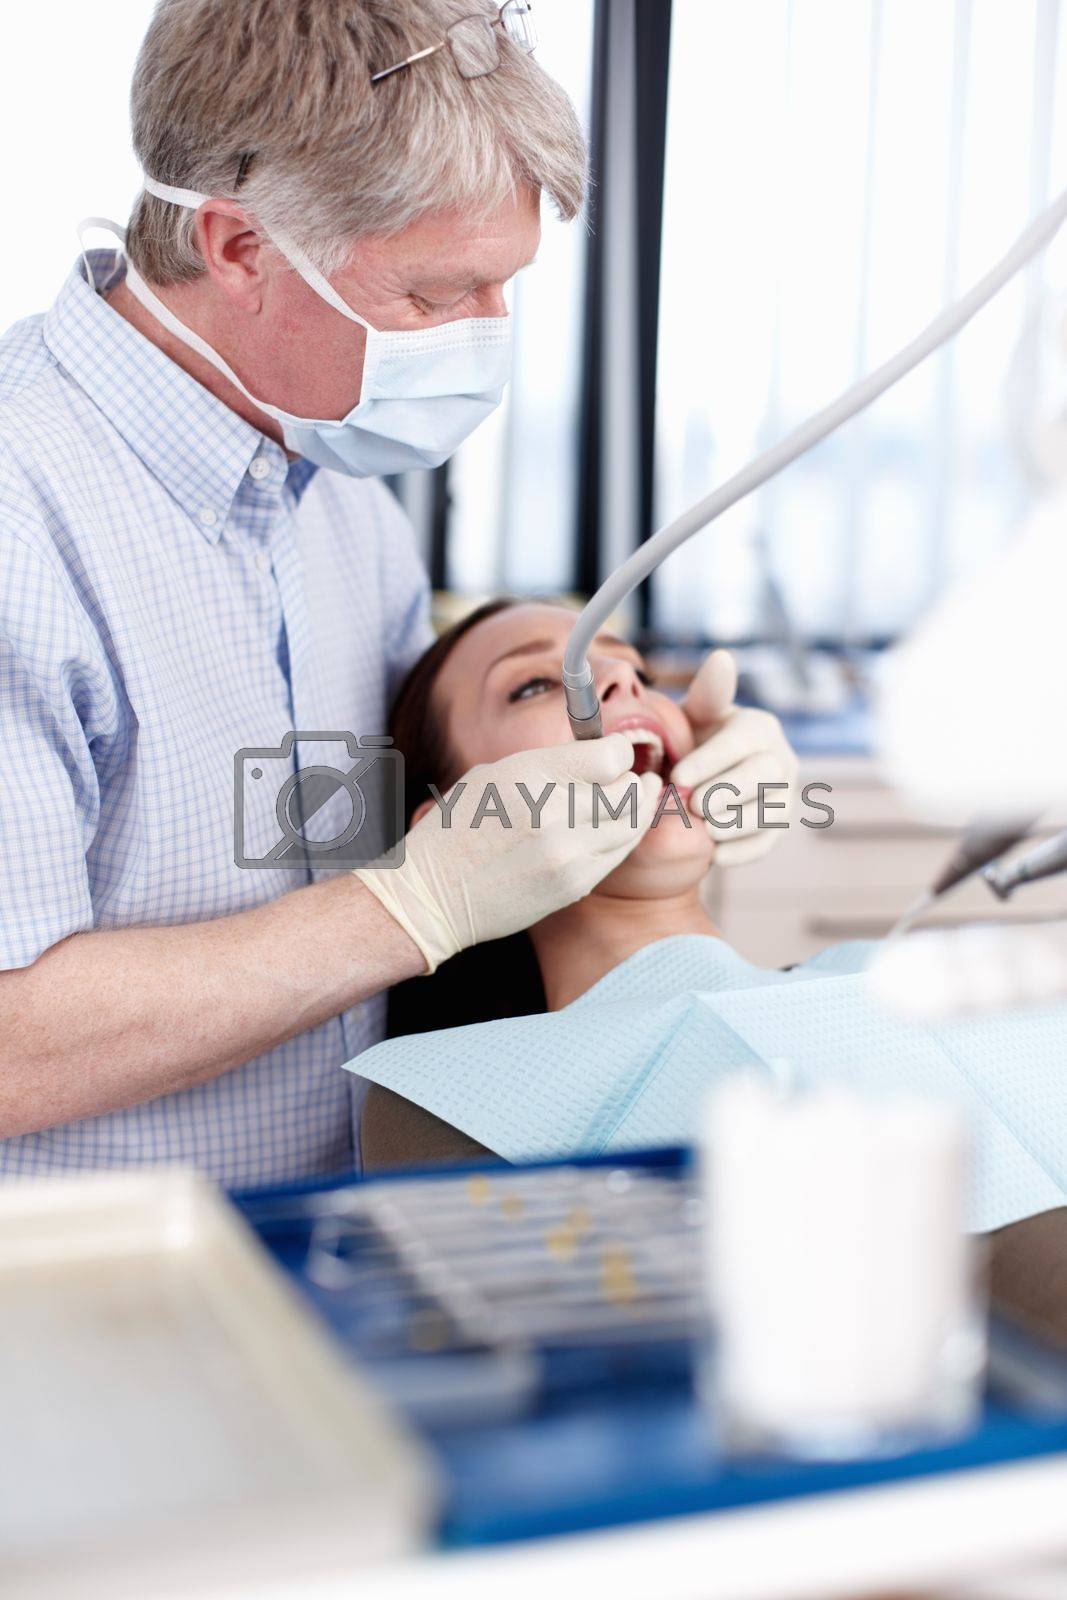 Royalty free image of Dental treatment. Portrait of patient ready for dental treatment in clinic. by YuriArcurs